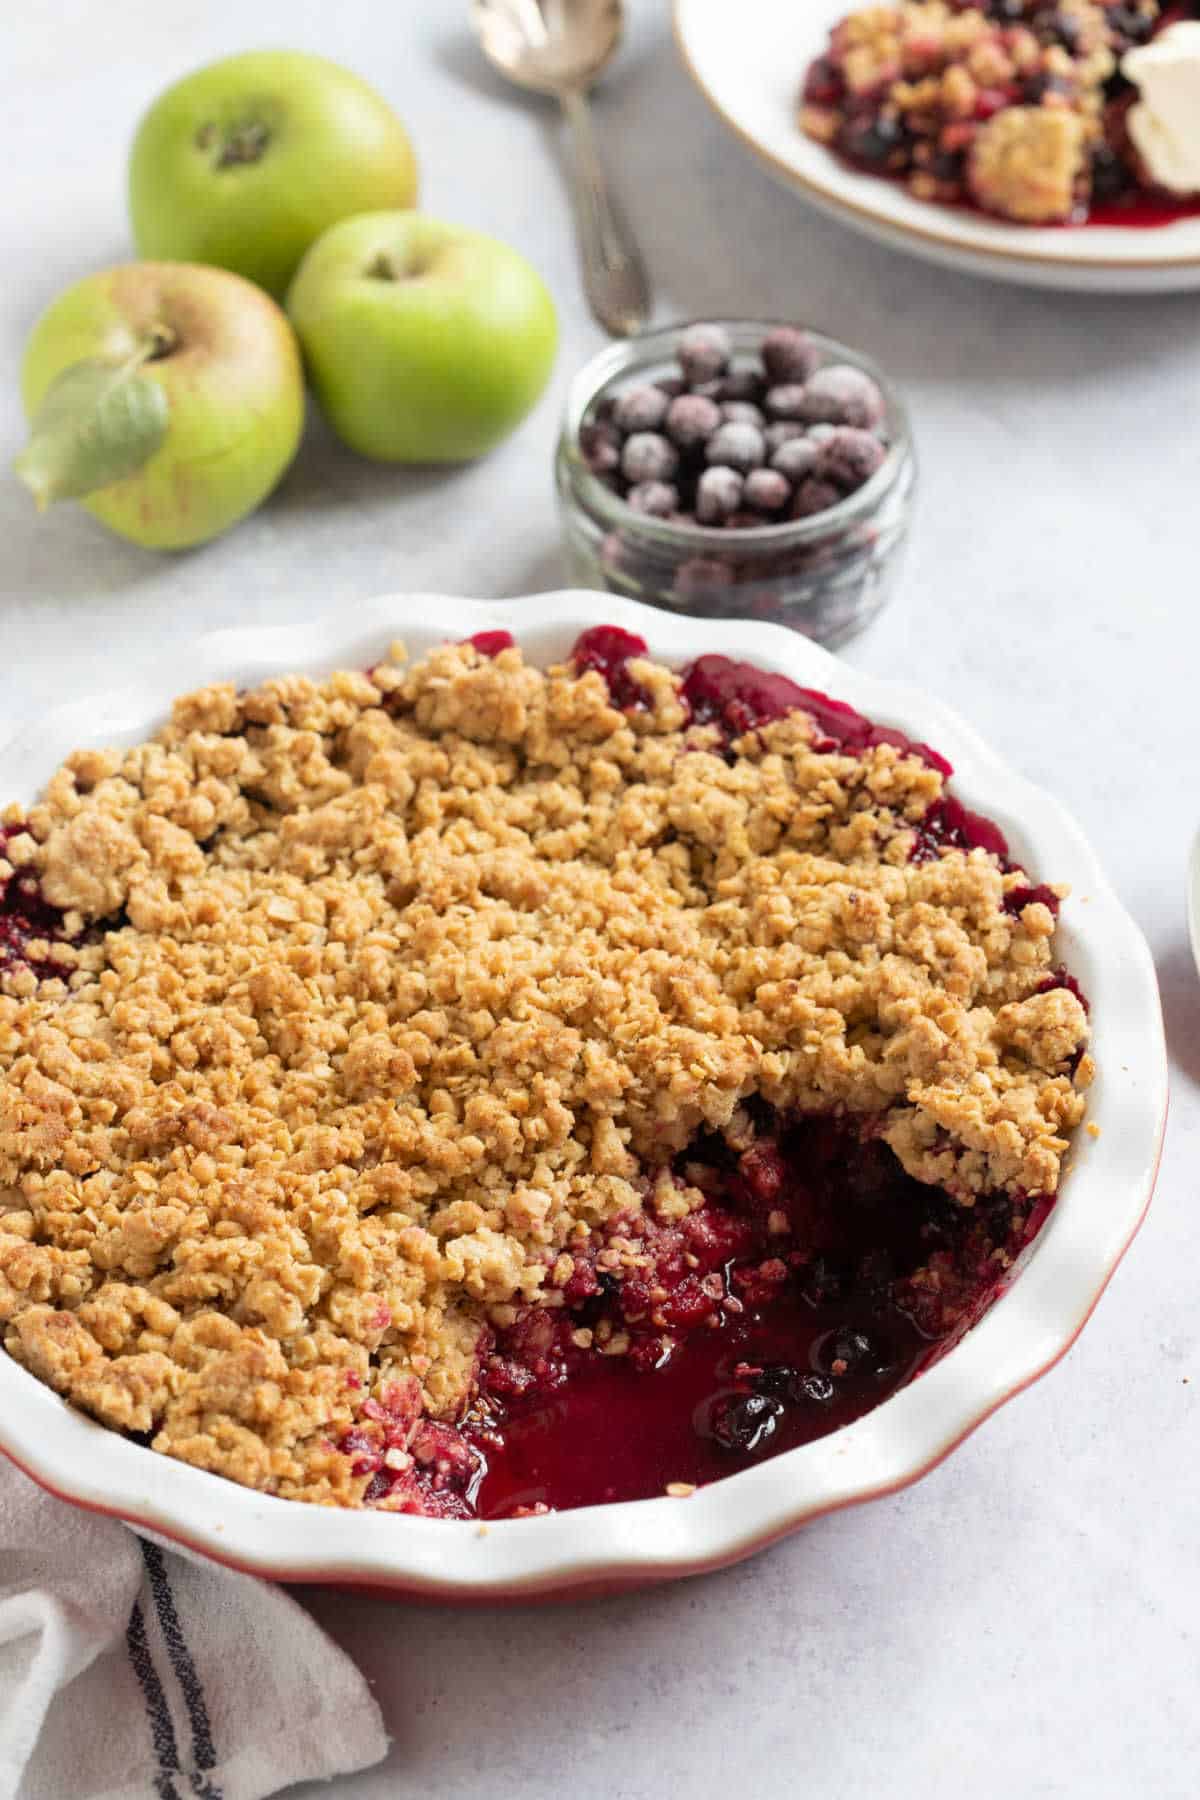 Blackcurrant crumble in a red pie dish.